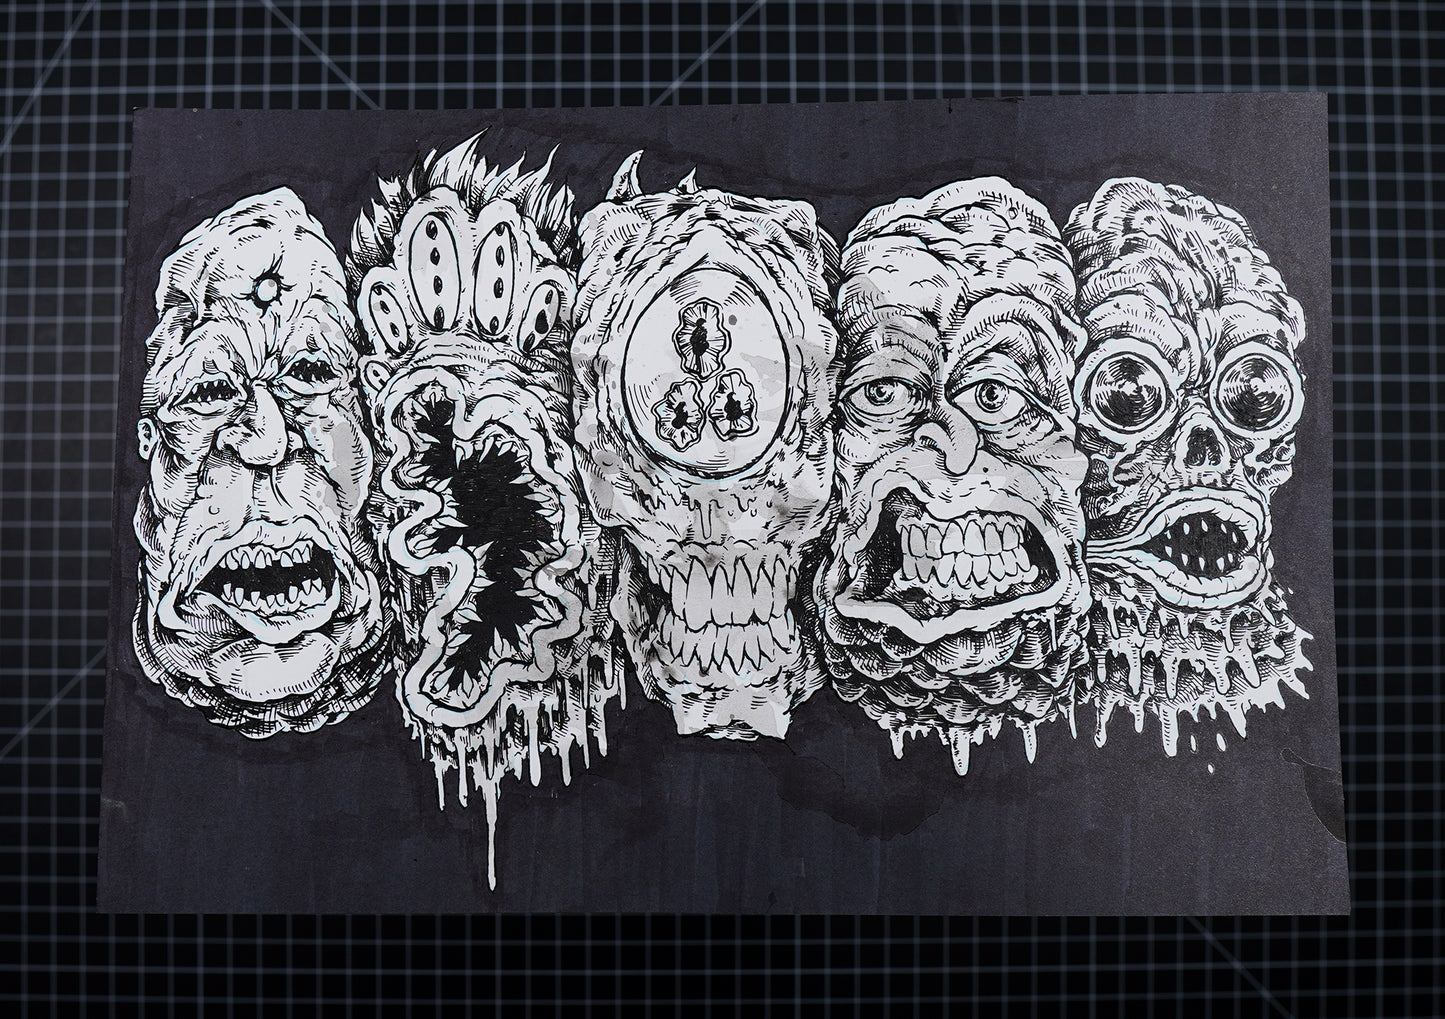 Original 5 Monster Heads in a Row Drawing